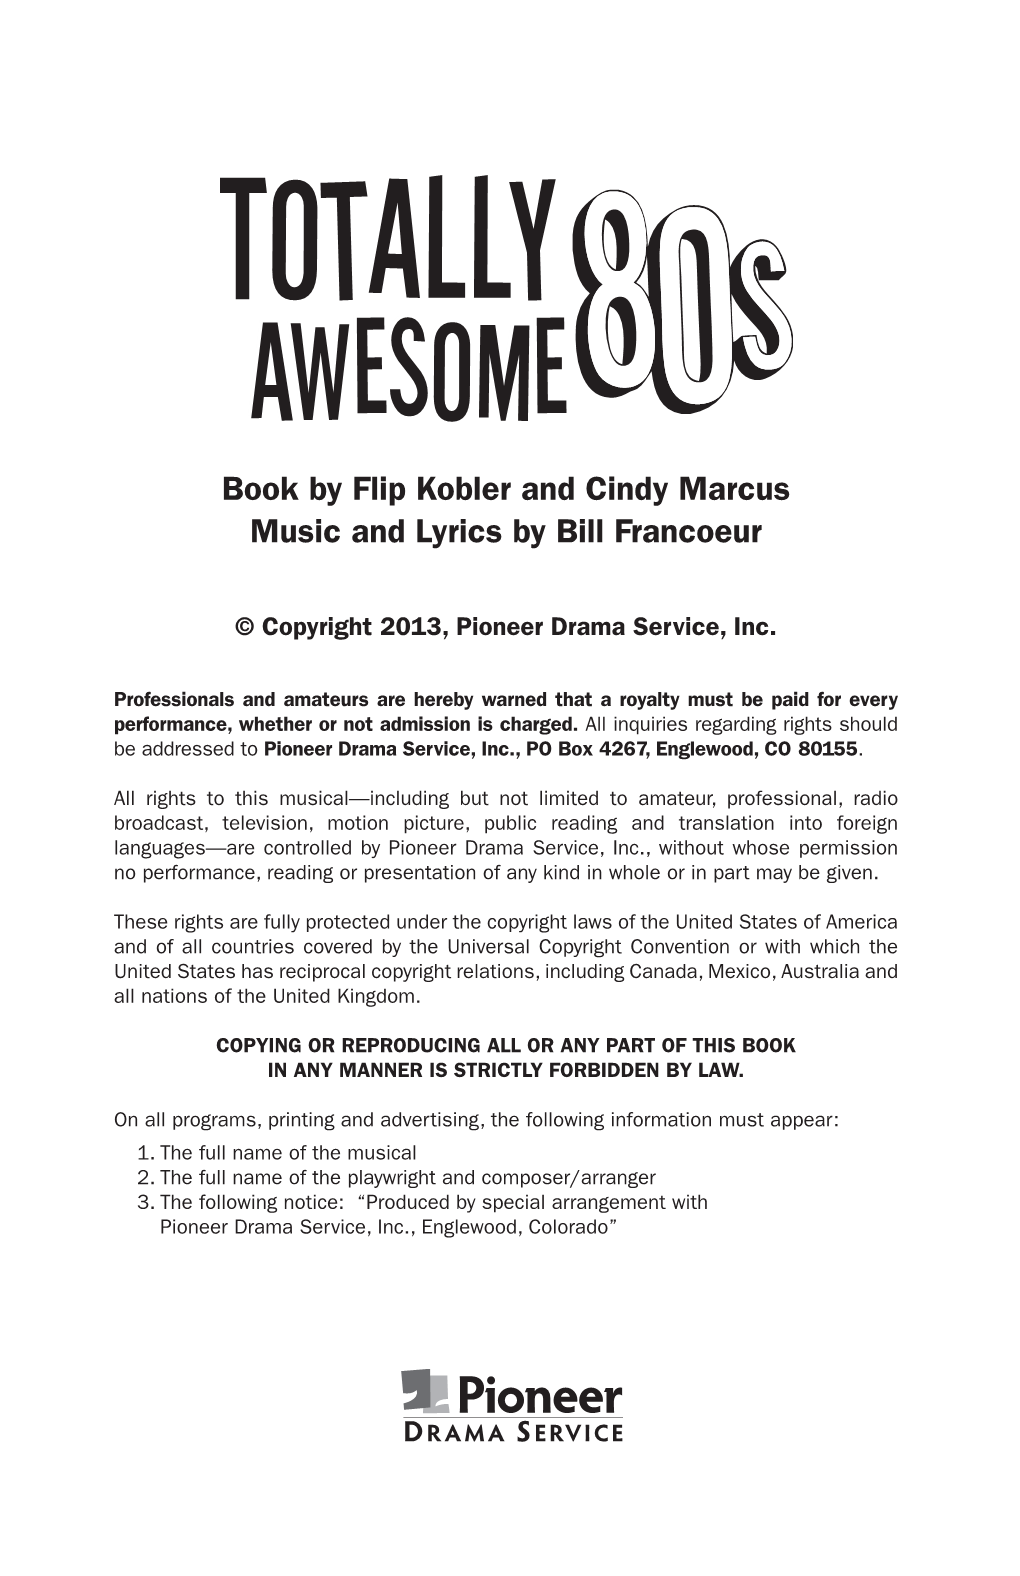 Book by FLIP KOBLER and CINDY MARCUS Music and Lyrics by BILL FRANCOEUR